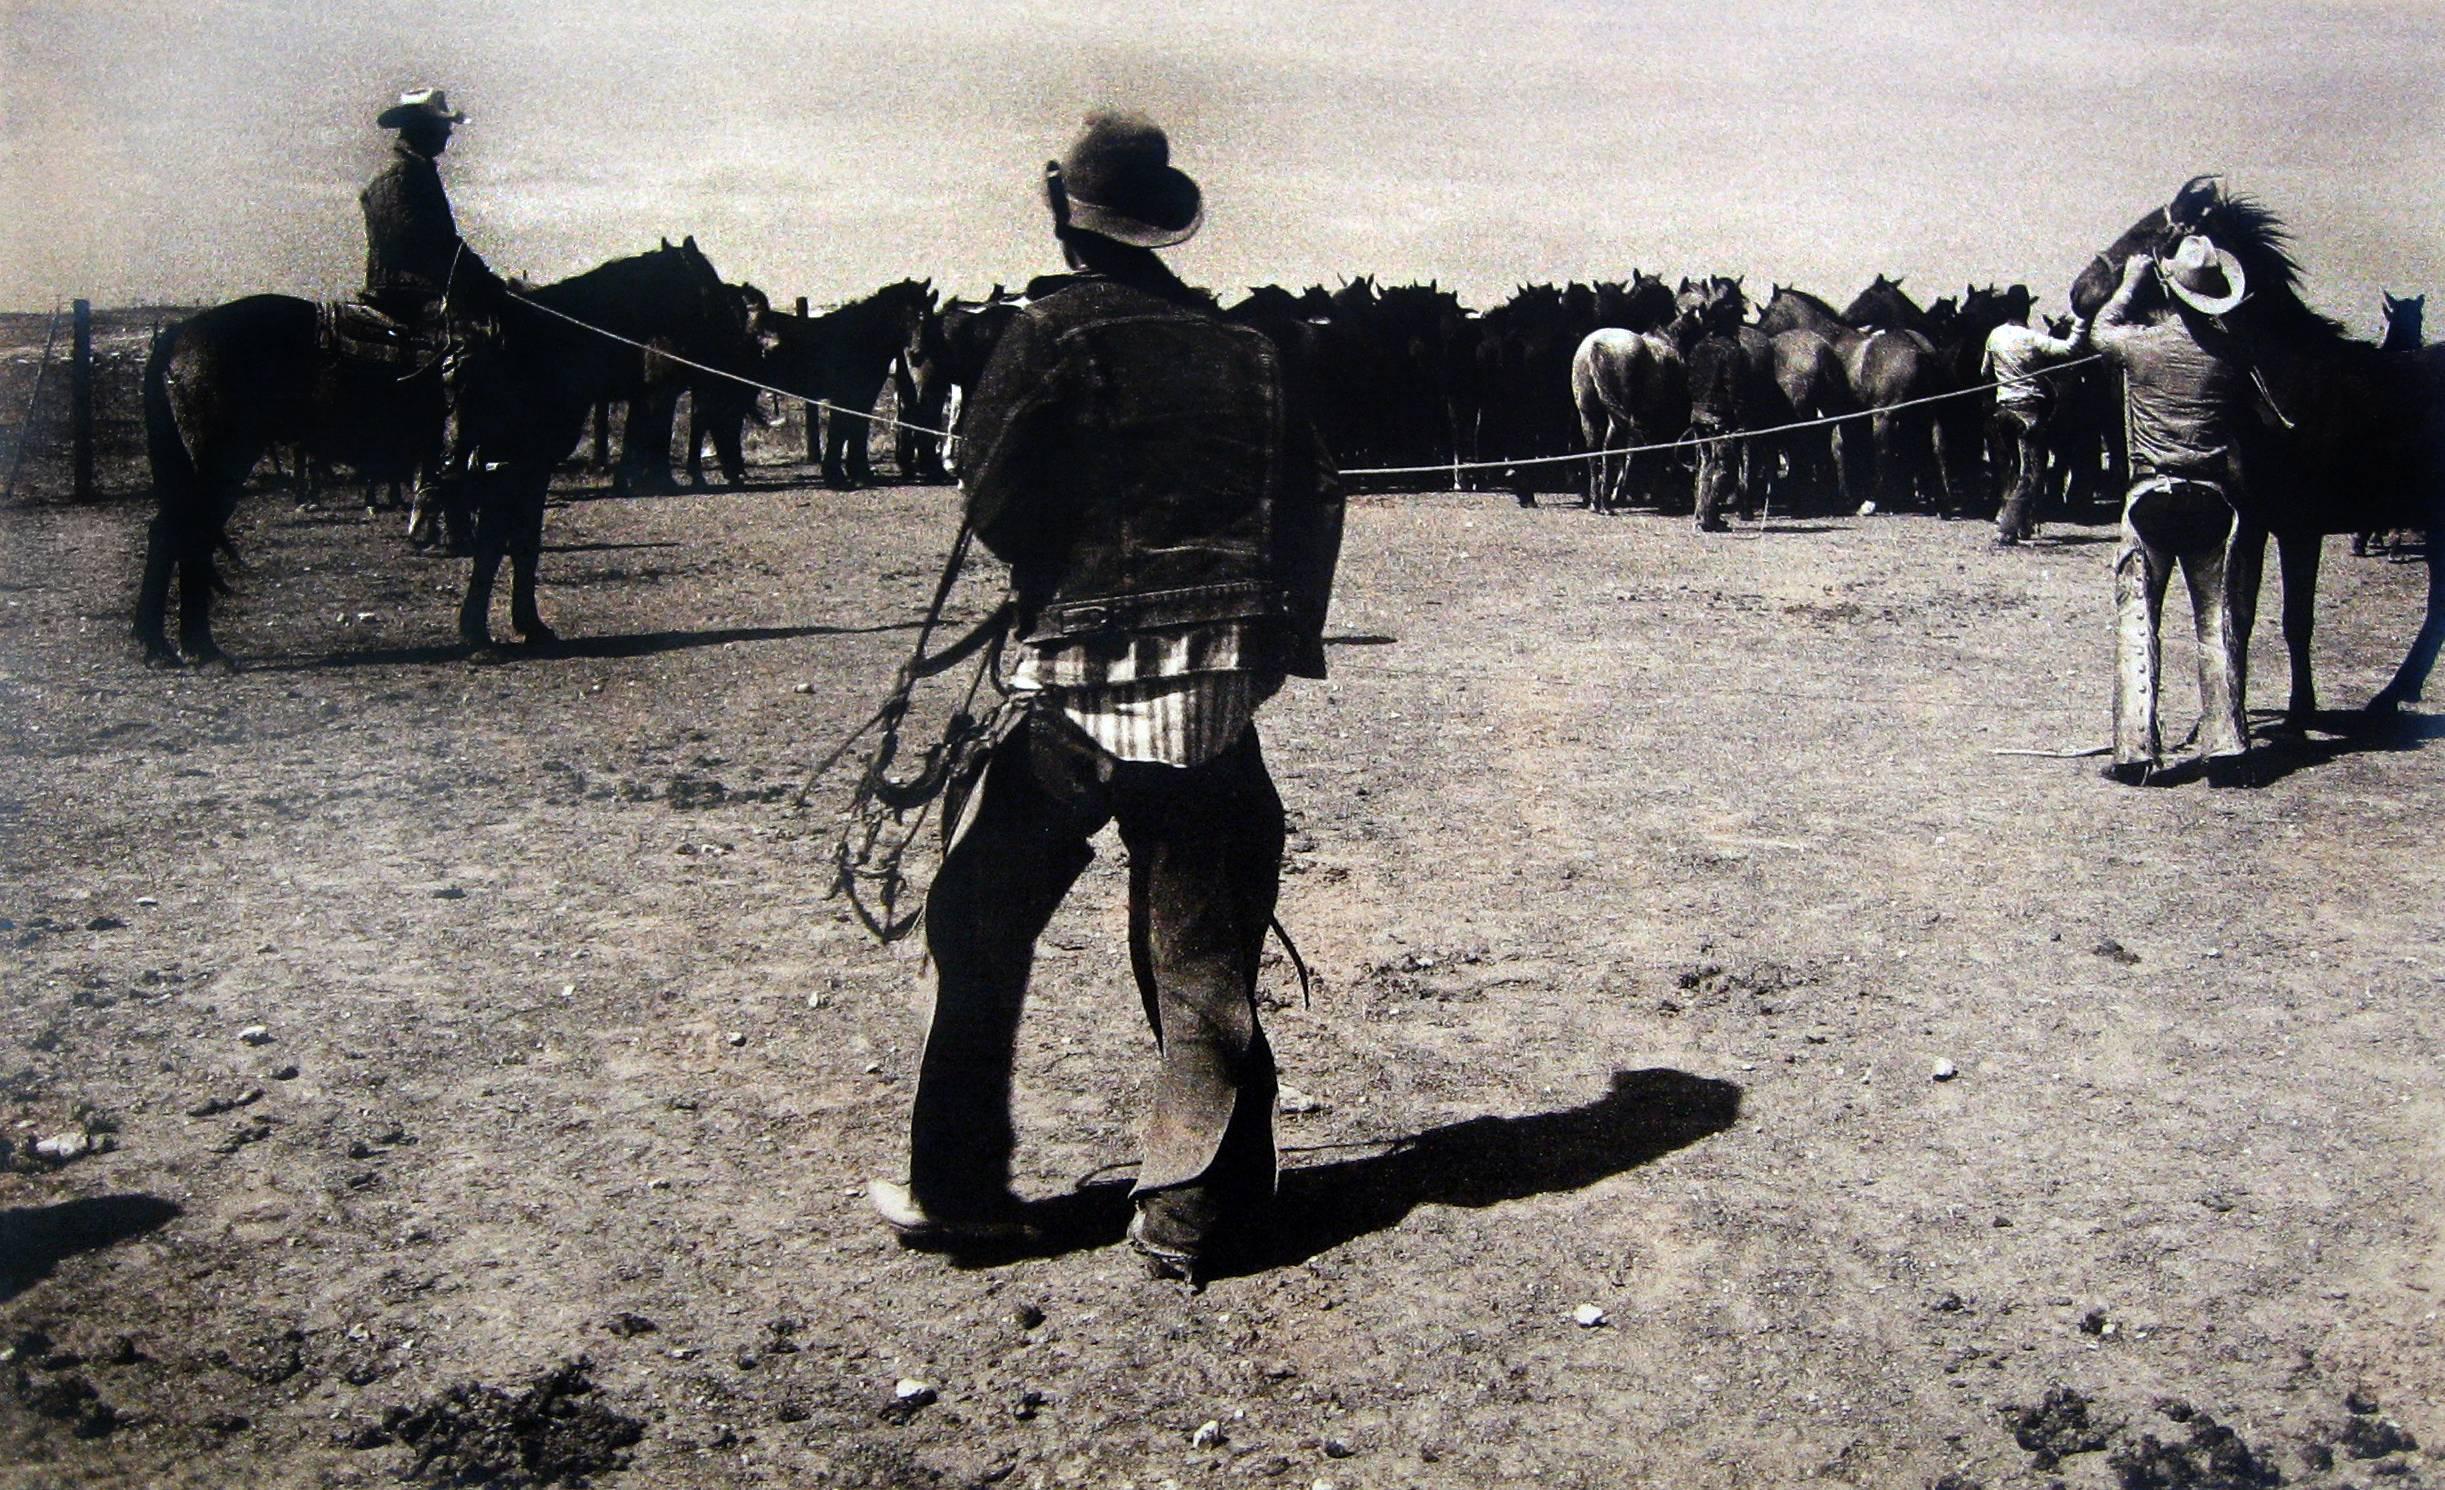 Black and White Photograph Bank Langmore - Sans titre (Cowboys with Rope and Horses (Cowboys with Rope and Horses)